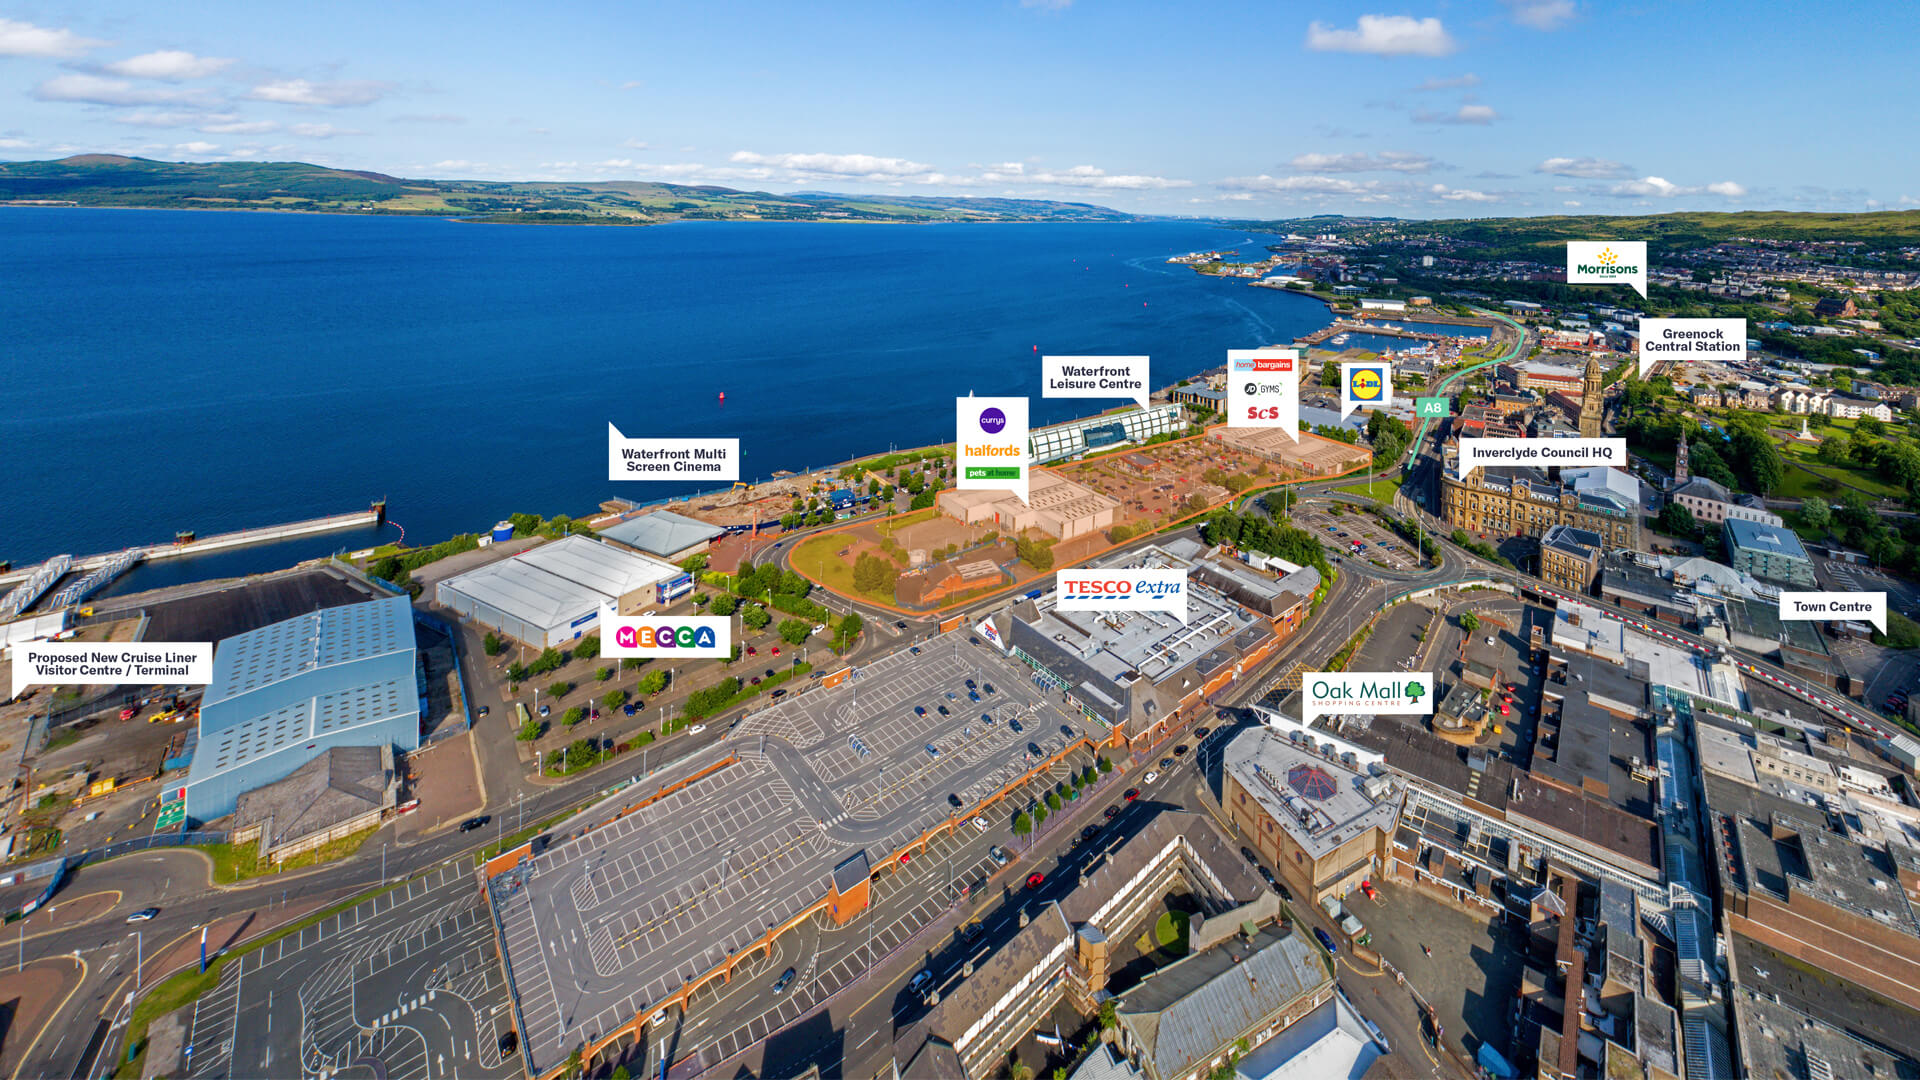 Waterfront Retail Park - aerial view